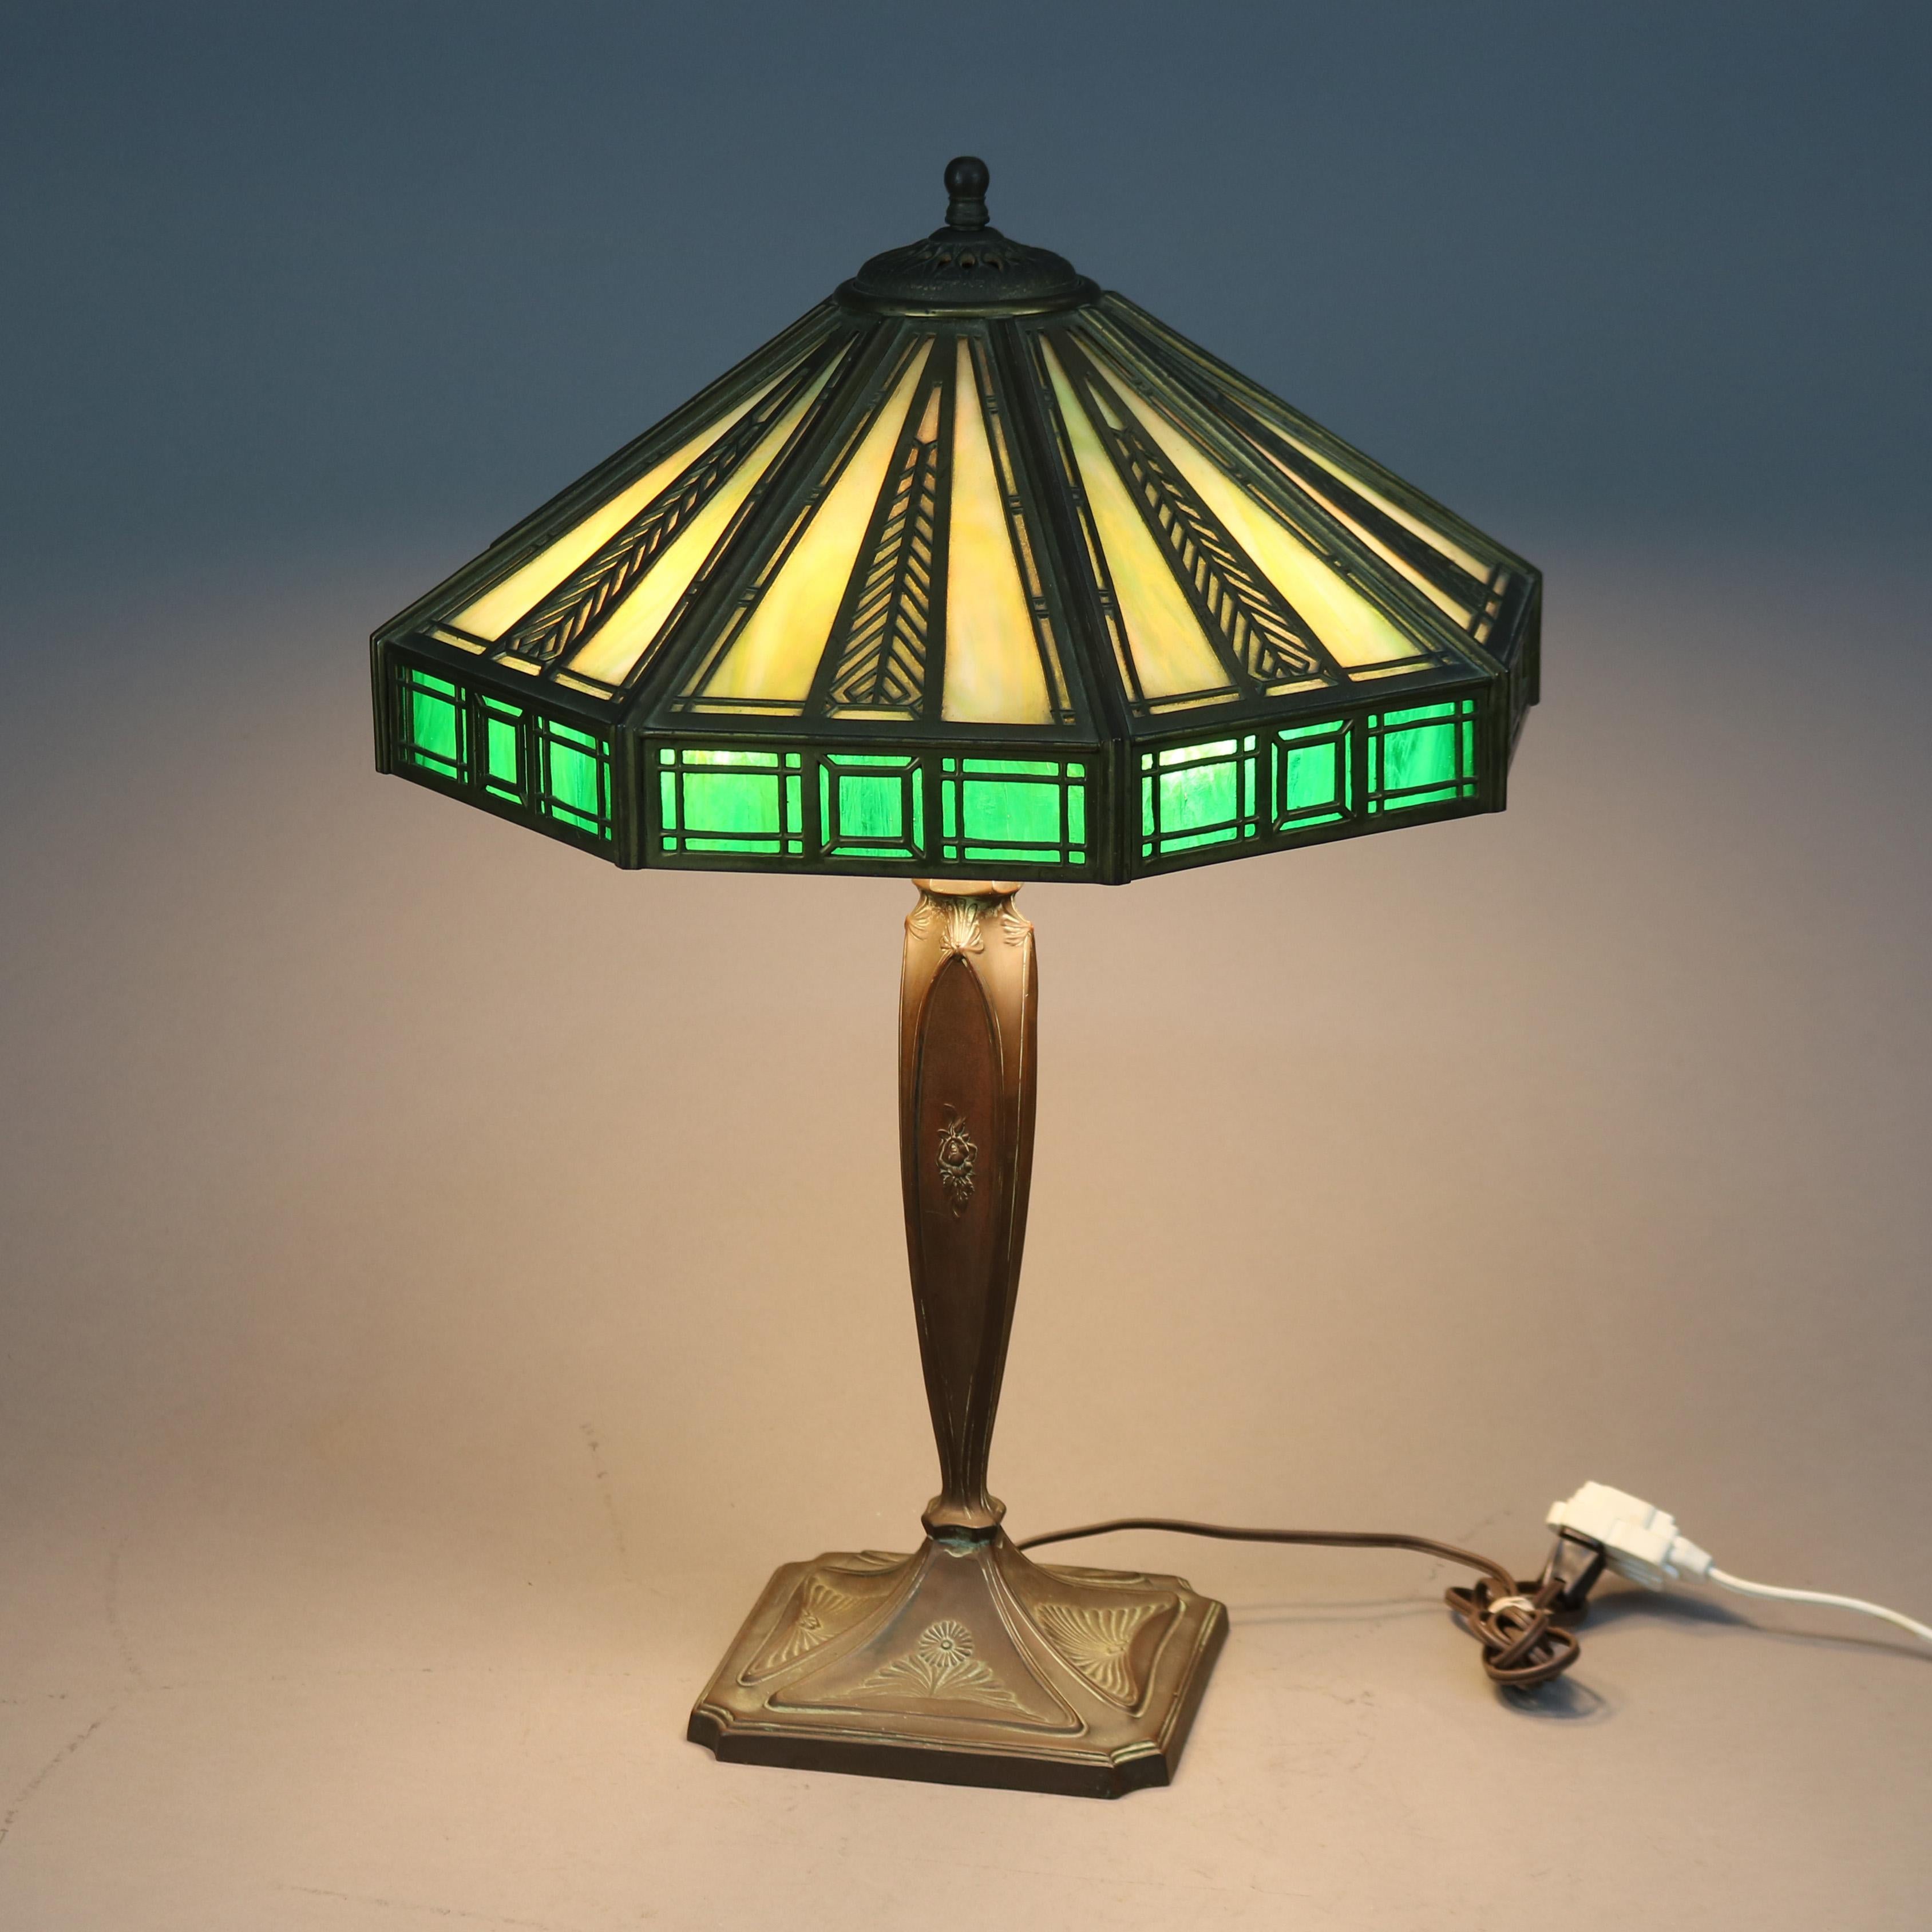 An antique Arts & Crafts table lamp by Wilkinson Lamp Co. offers flared filigree shade having stylized feather pattern and housing two tome slag glass panels over triple socket cast base, maker mark on base as photographed, c1910

Measures -